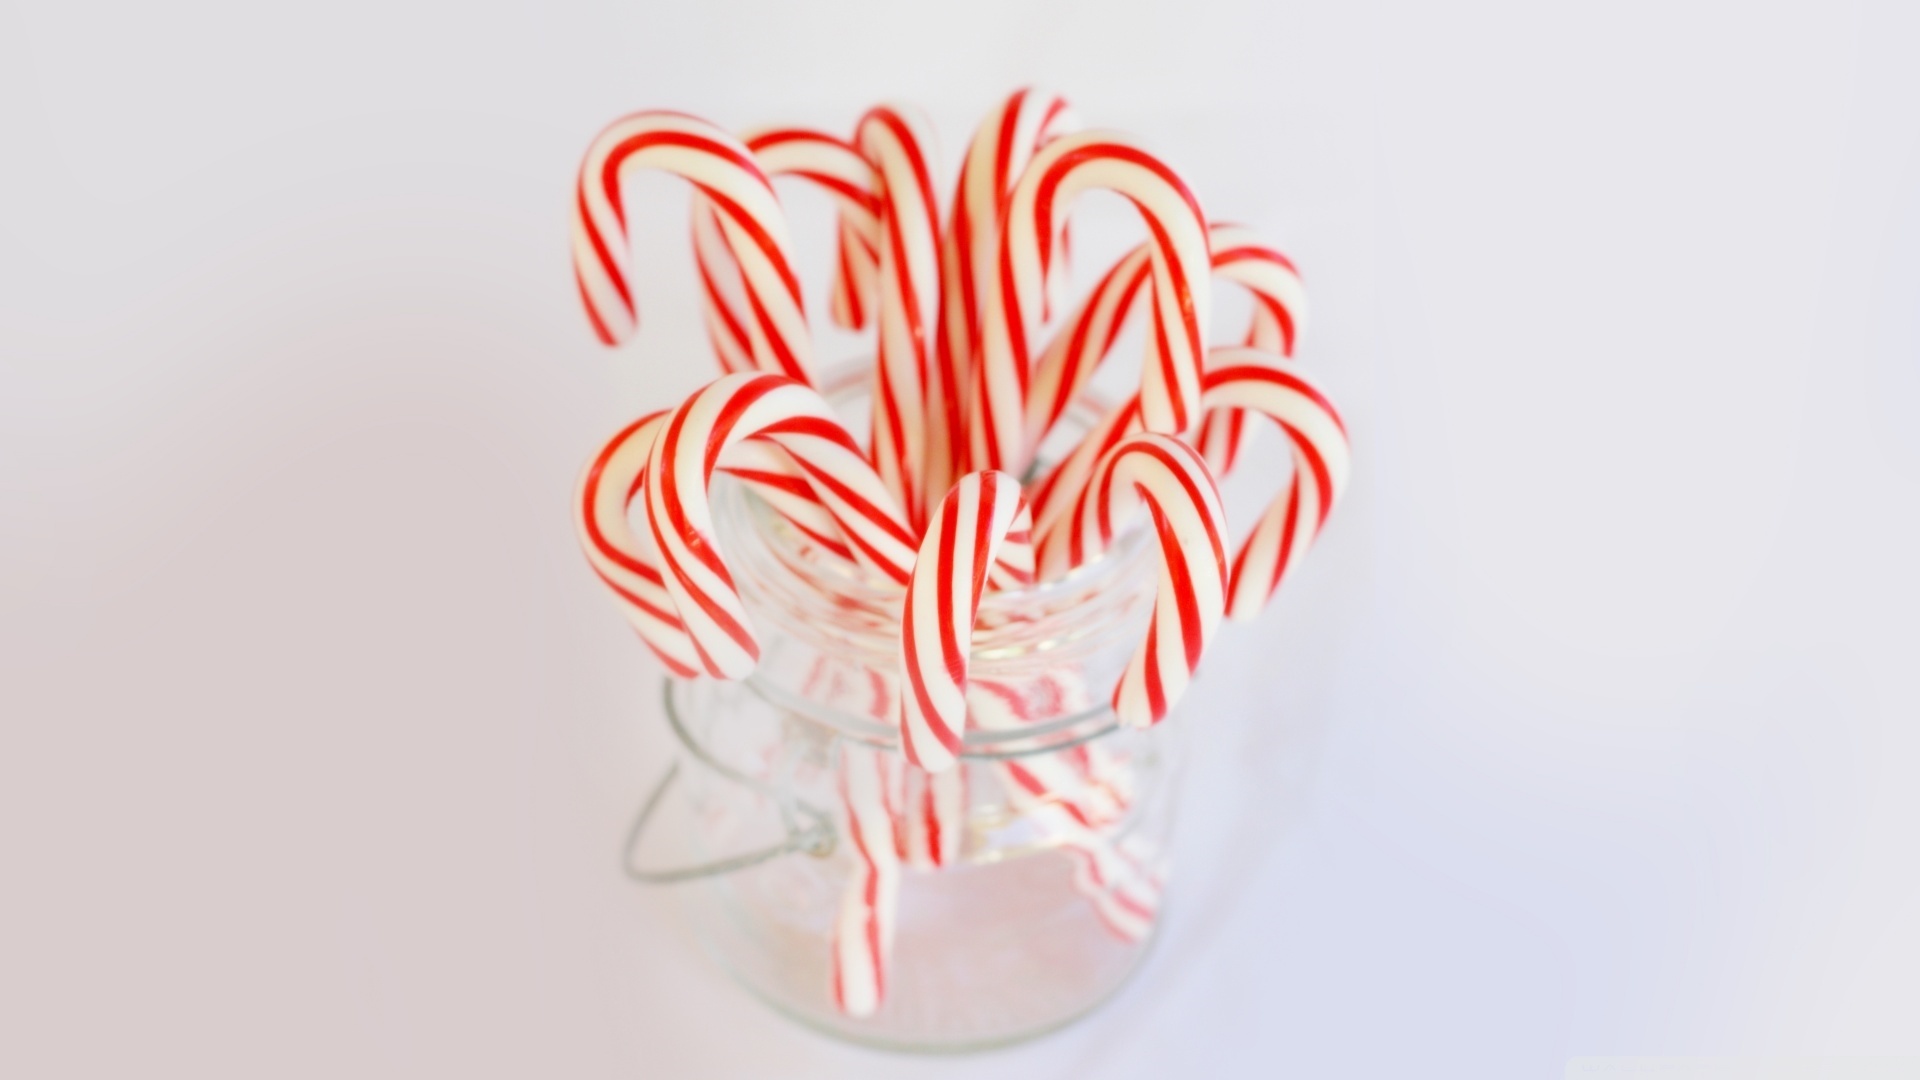 Candy Cane Background Wallpaper